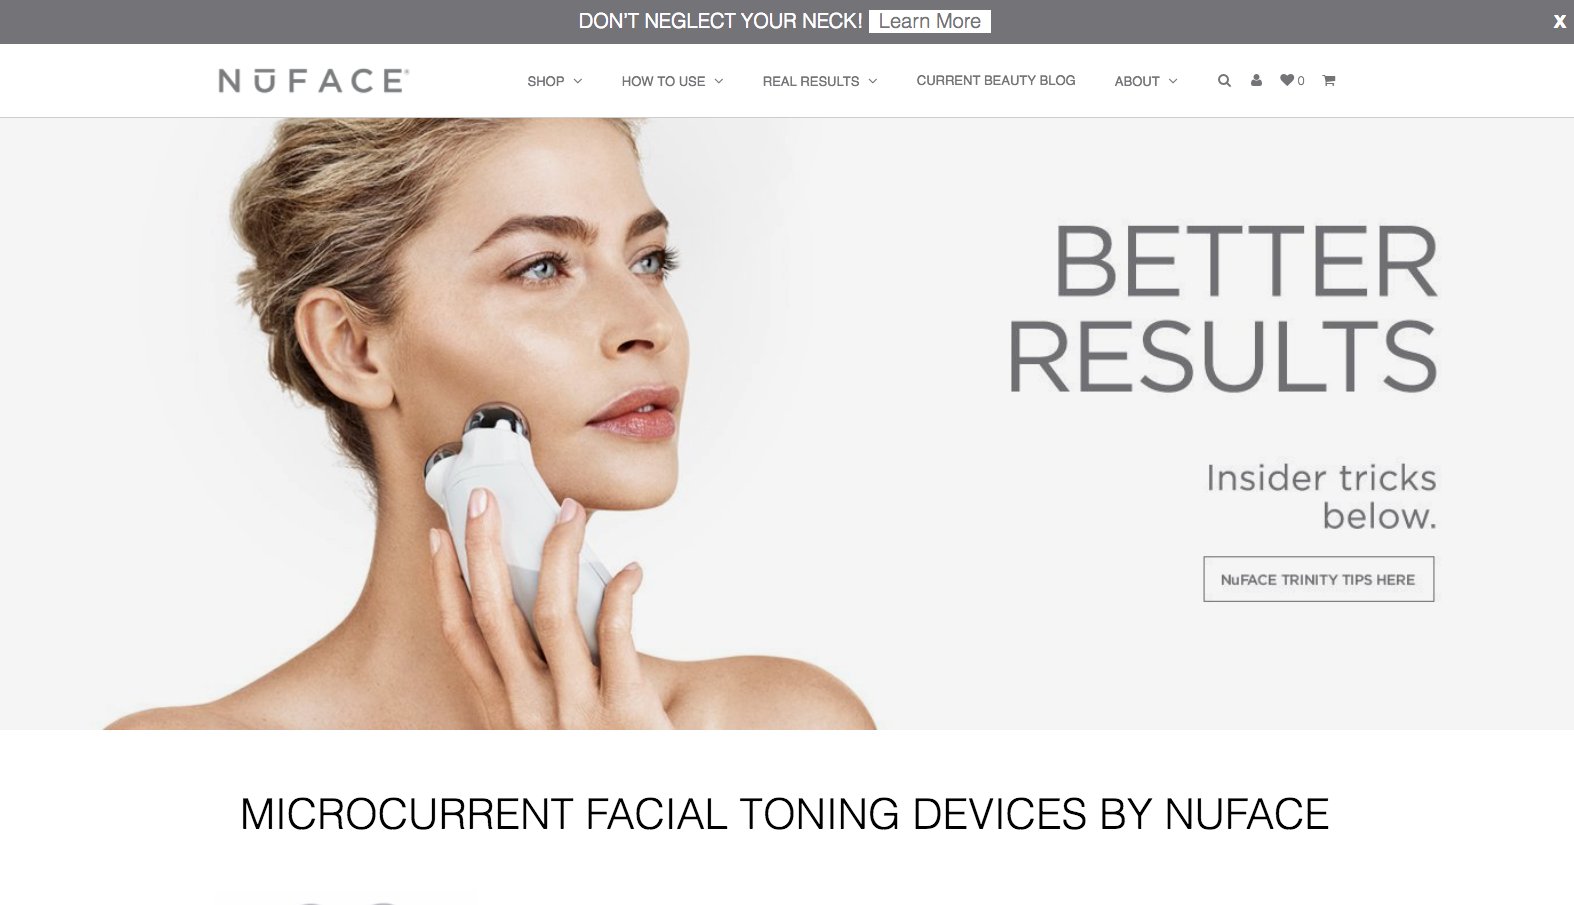 NuFACE found that adding free shipping increased their average order value by over 7%